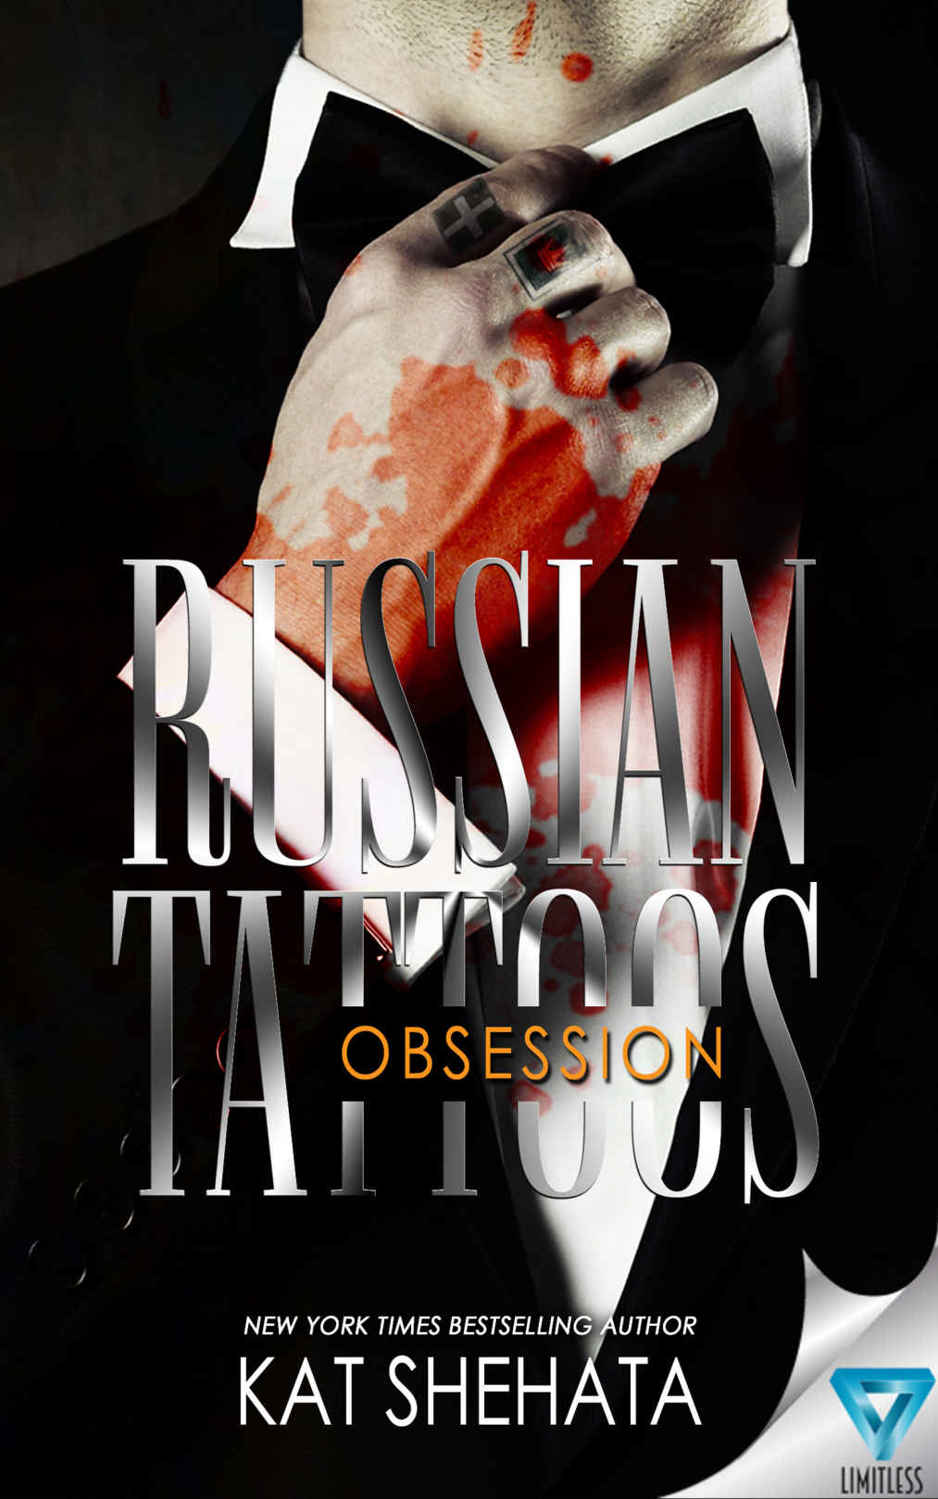 Russian Tattoos Obsession by Kat Shehata